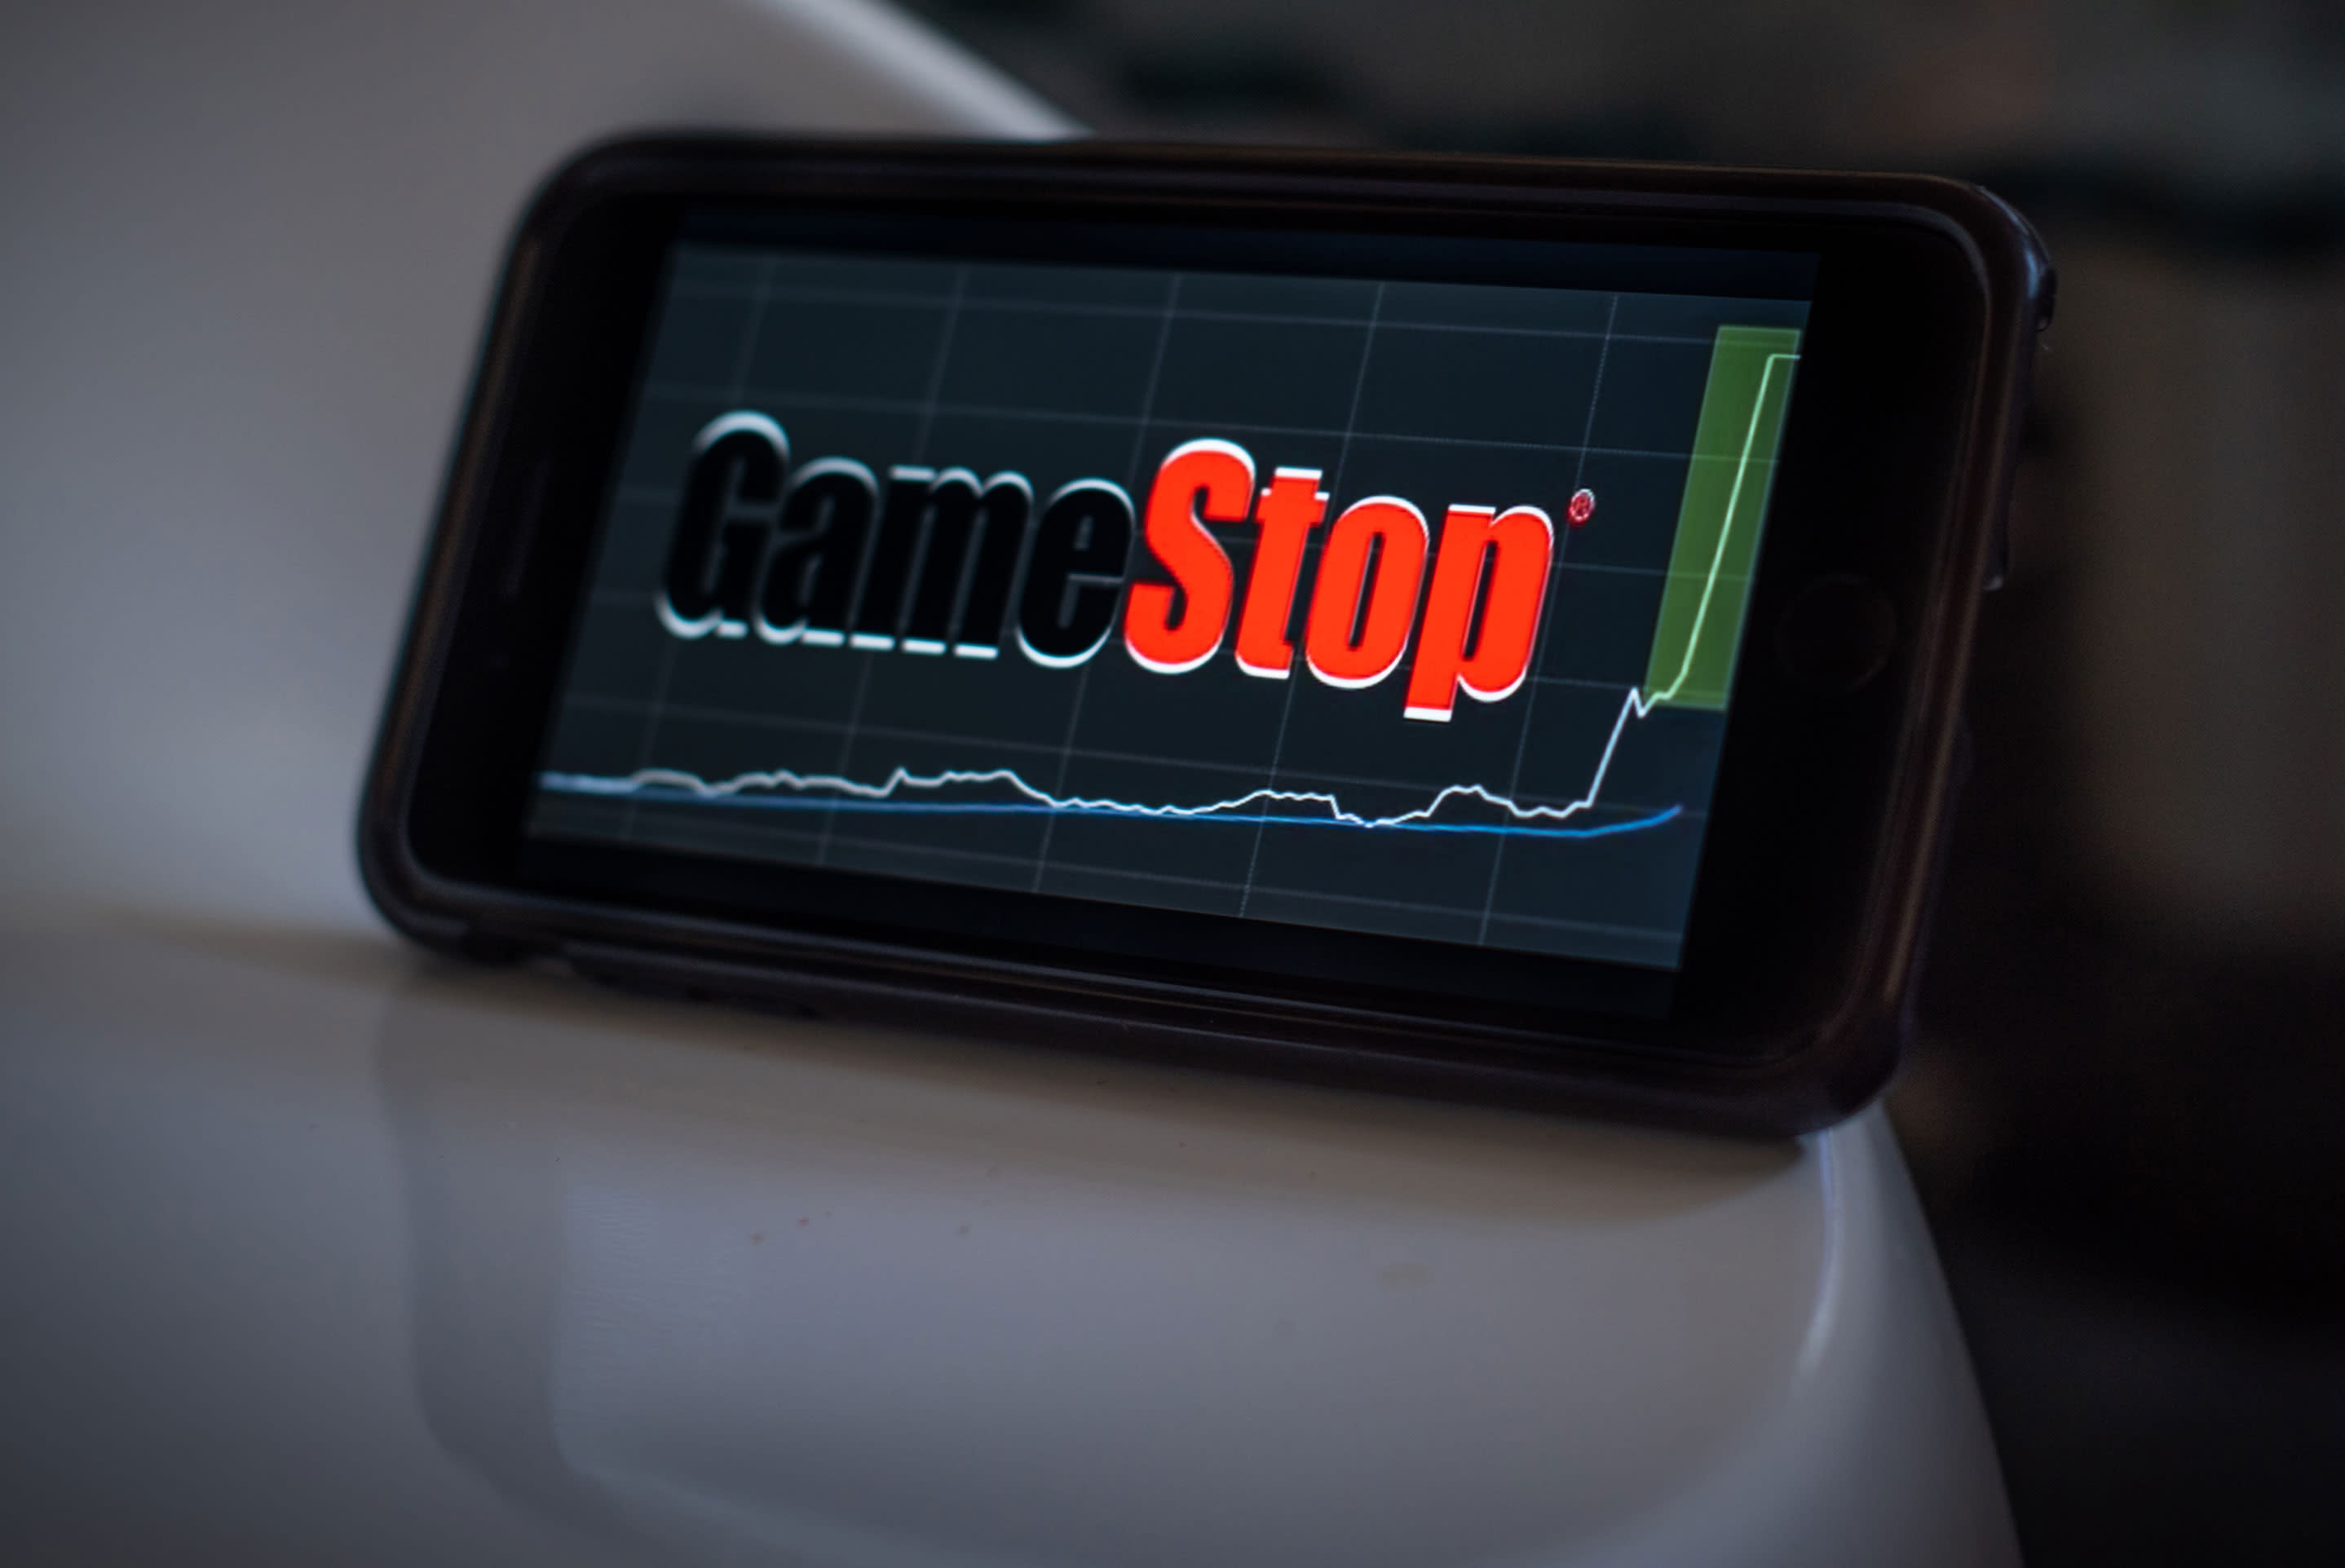 What could GameStop madness mean for the future of the stock market